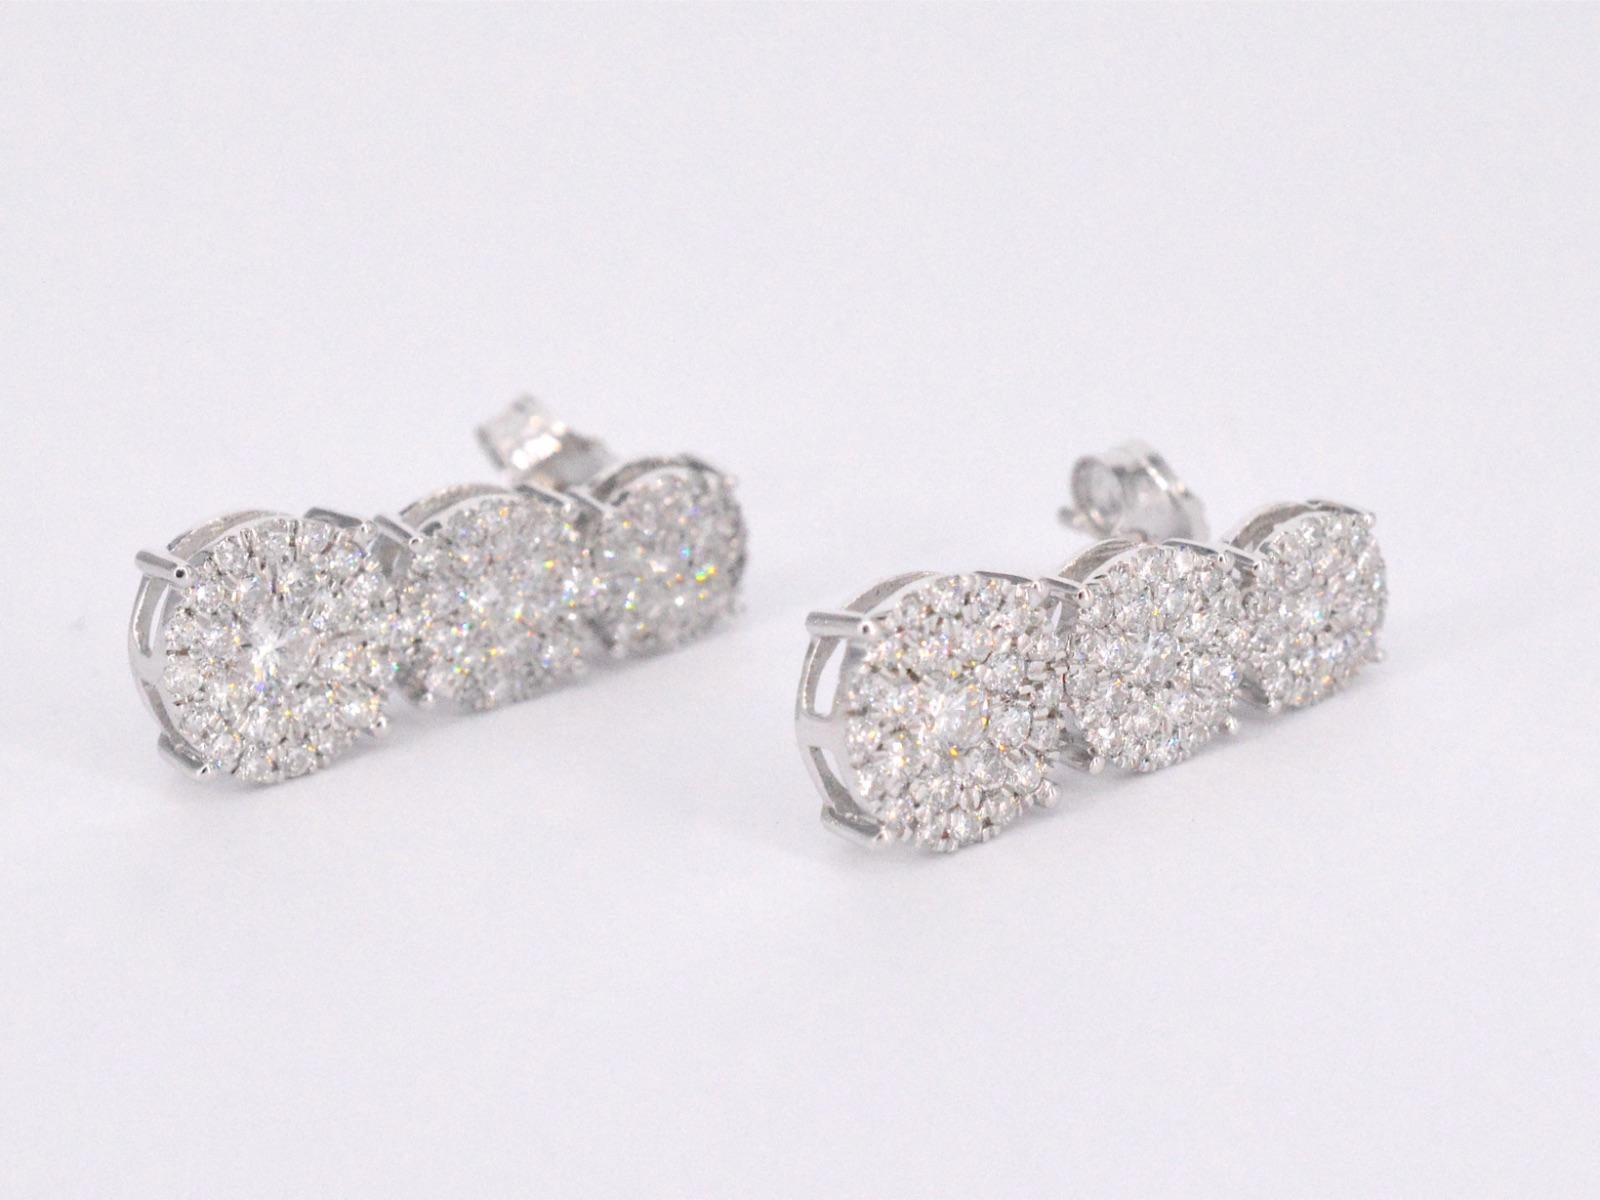 White Gold Earrings with Three Chatons of Diamonds below Each Other For Sale 3